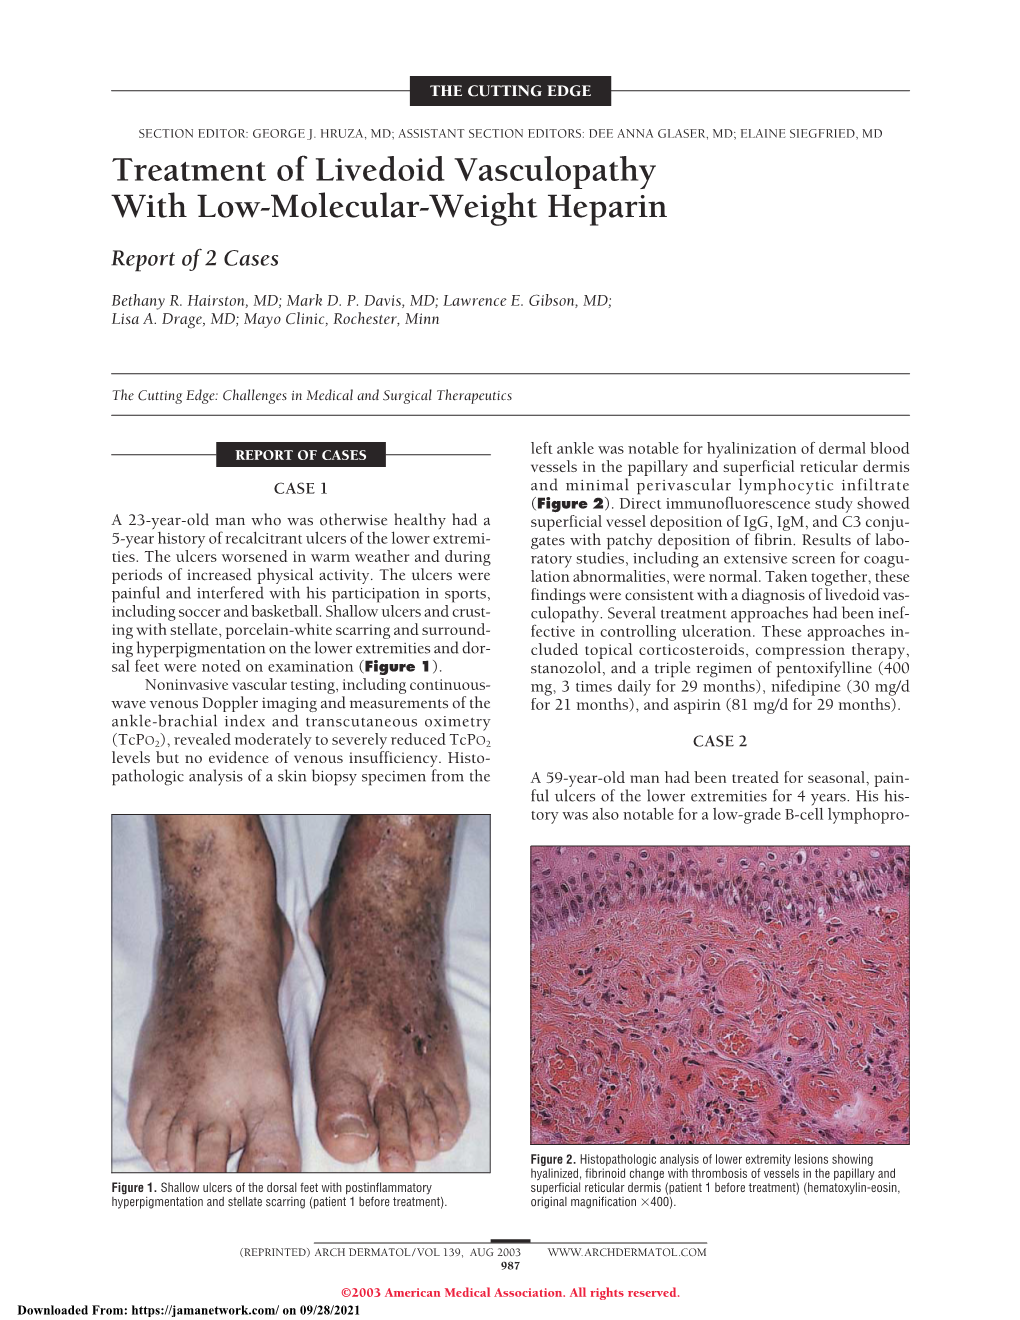 Treatment of Livedoid Vasculopathy with Low-Molecular-Weight Heparin Report of 2 Cases